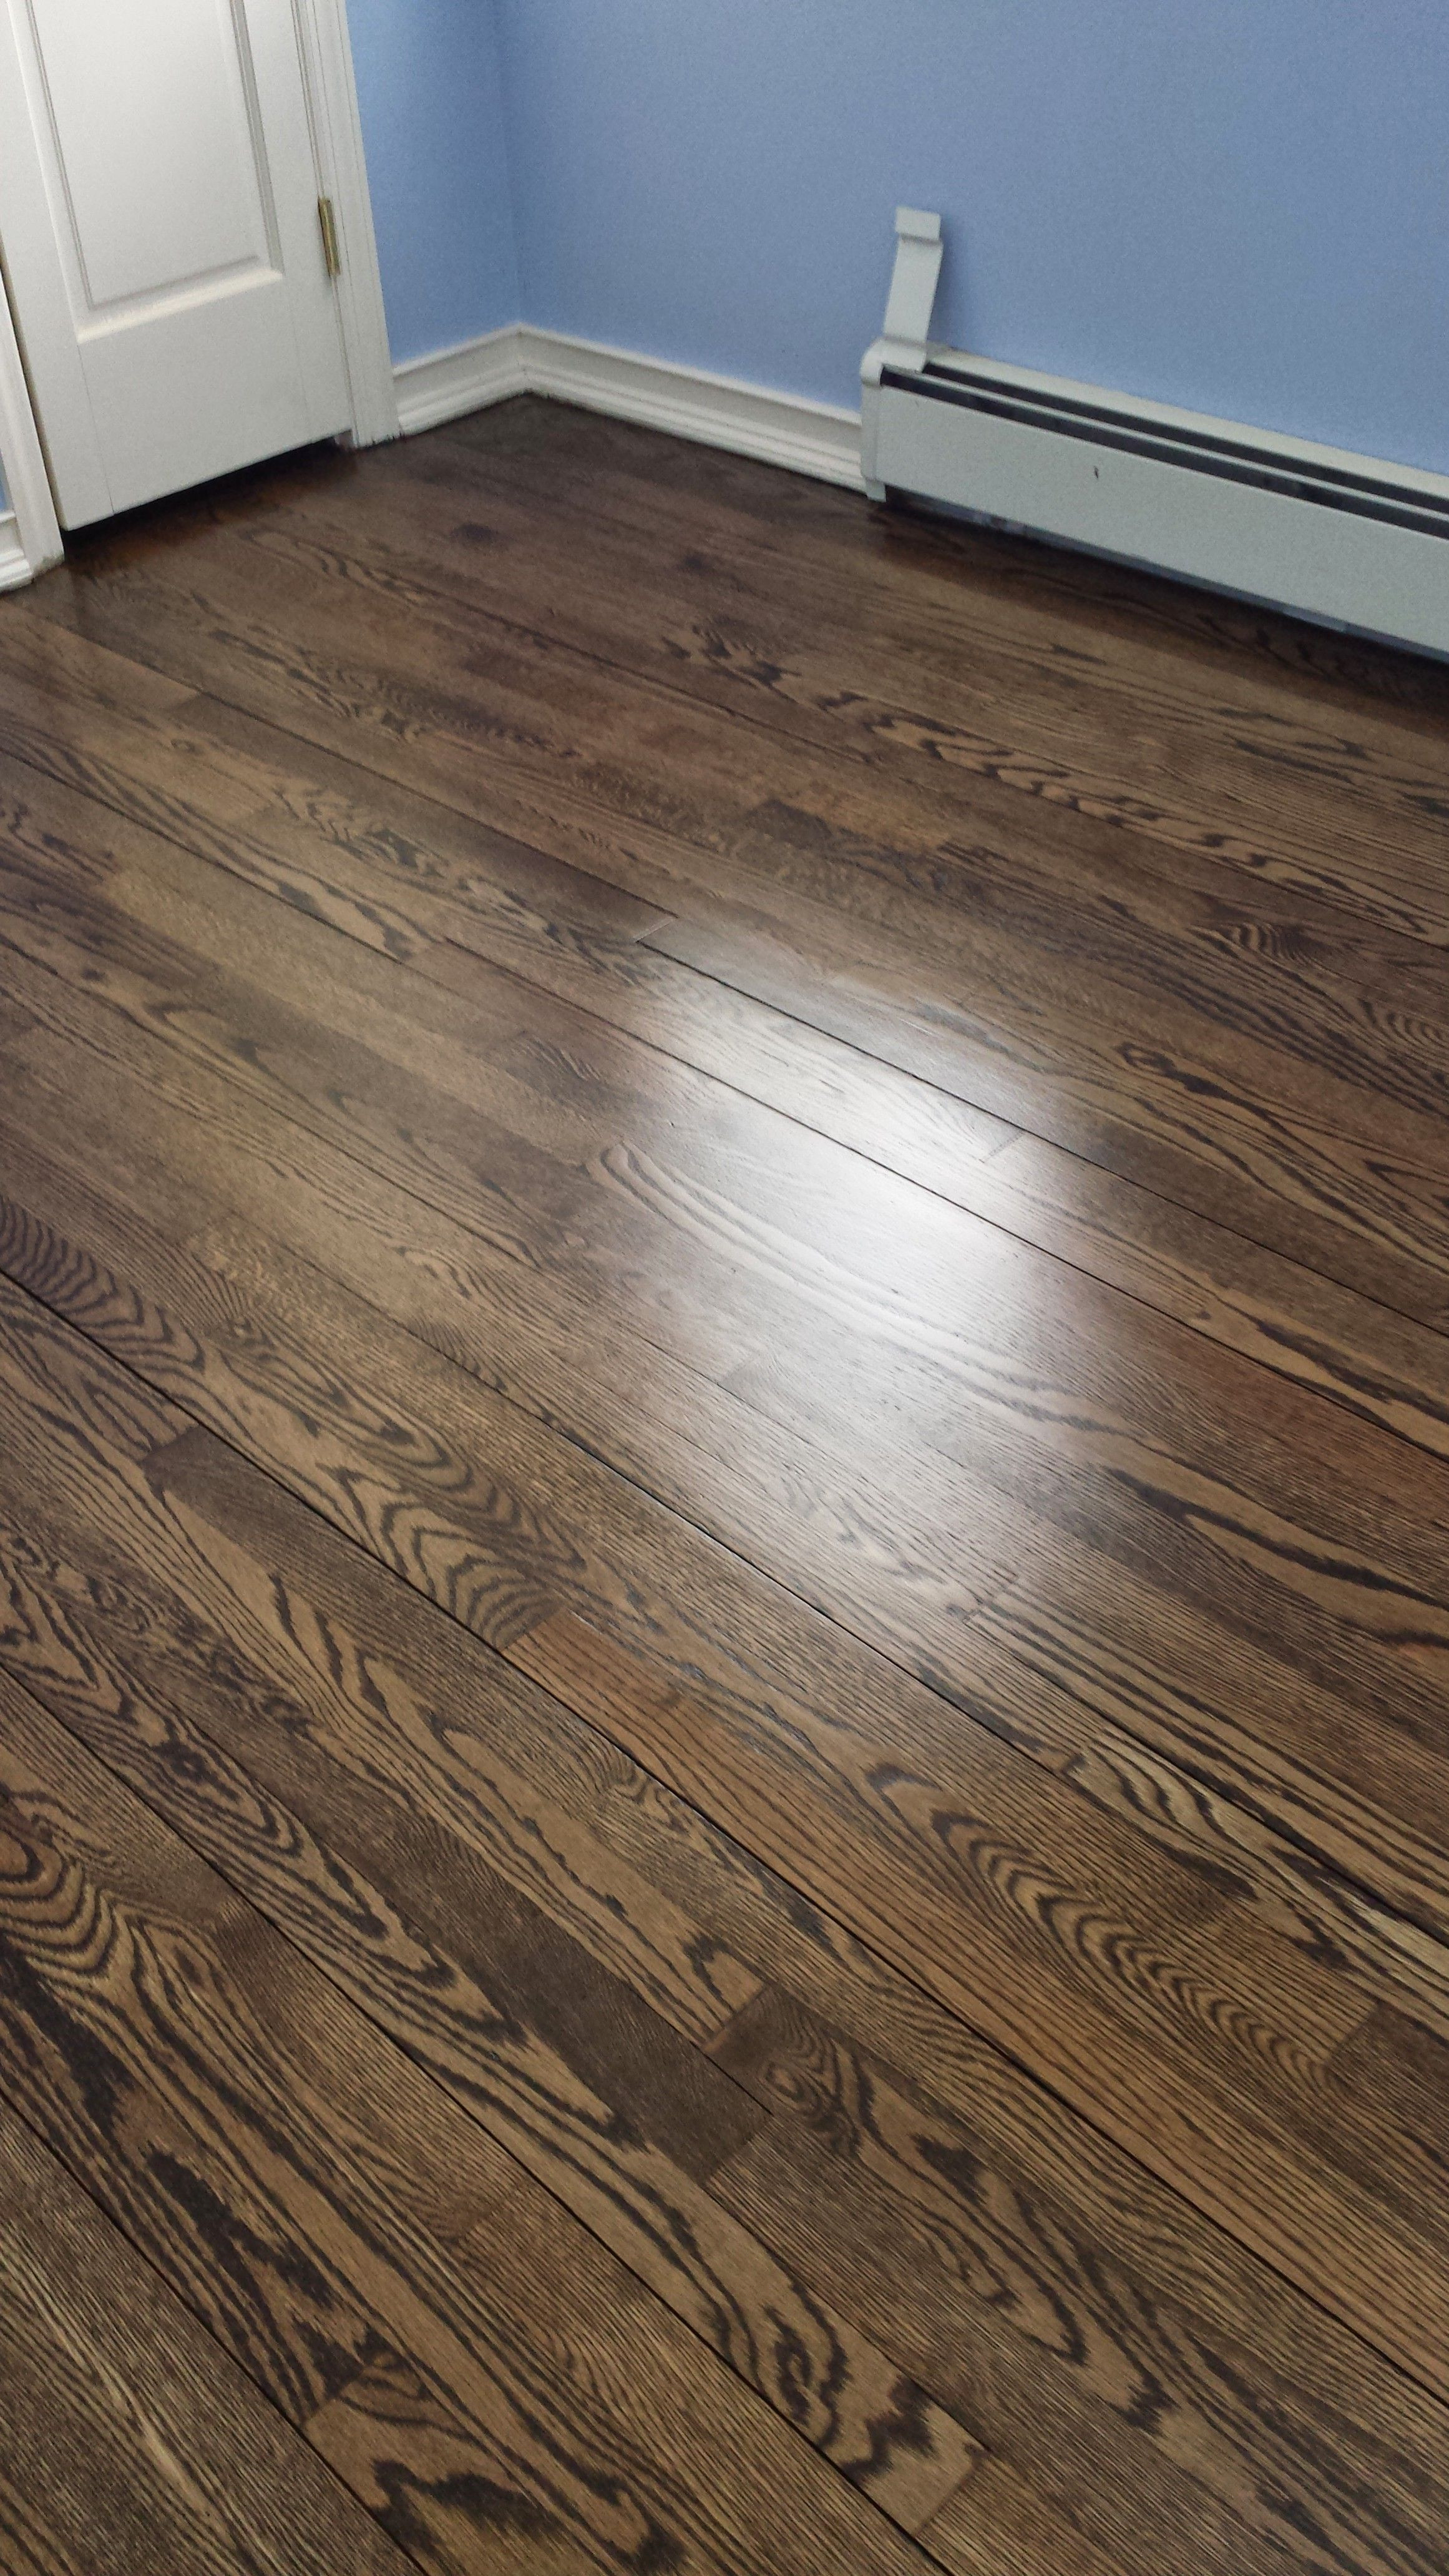 28 Nice Hardwood Floor In Basement 2024 free download hardwood floor in basement of 40 hardwood flooring pros and cons concept throughout hardwood floor refinishing is an affordable way to spruce up your space without a full replacement